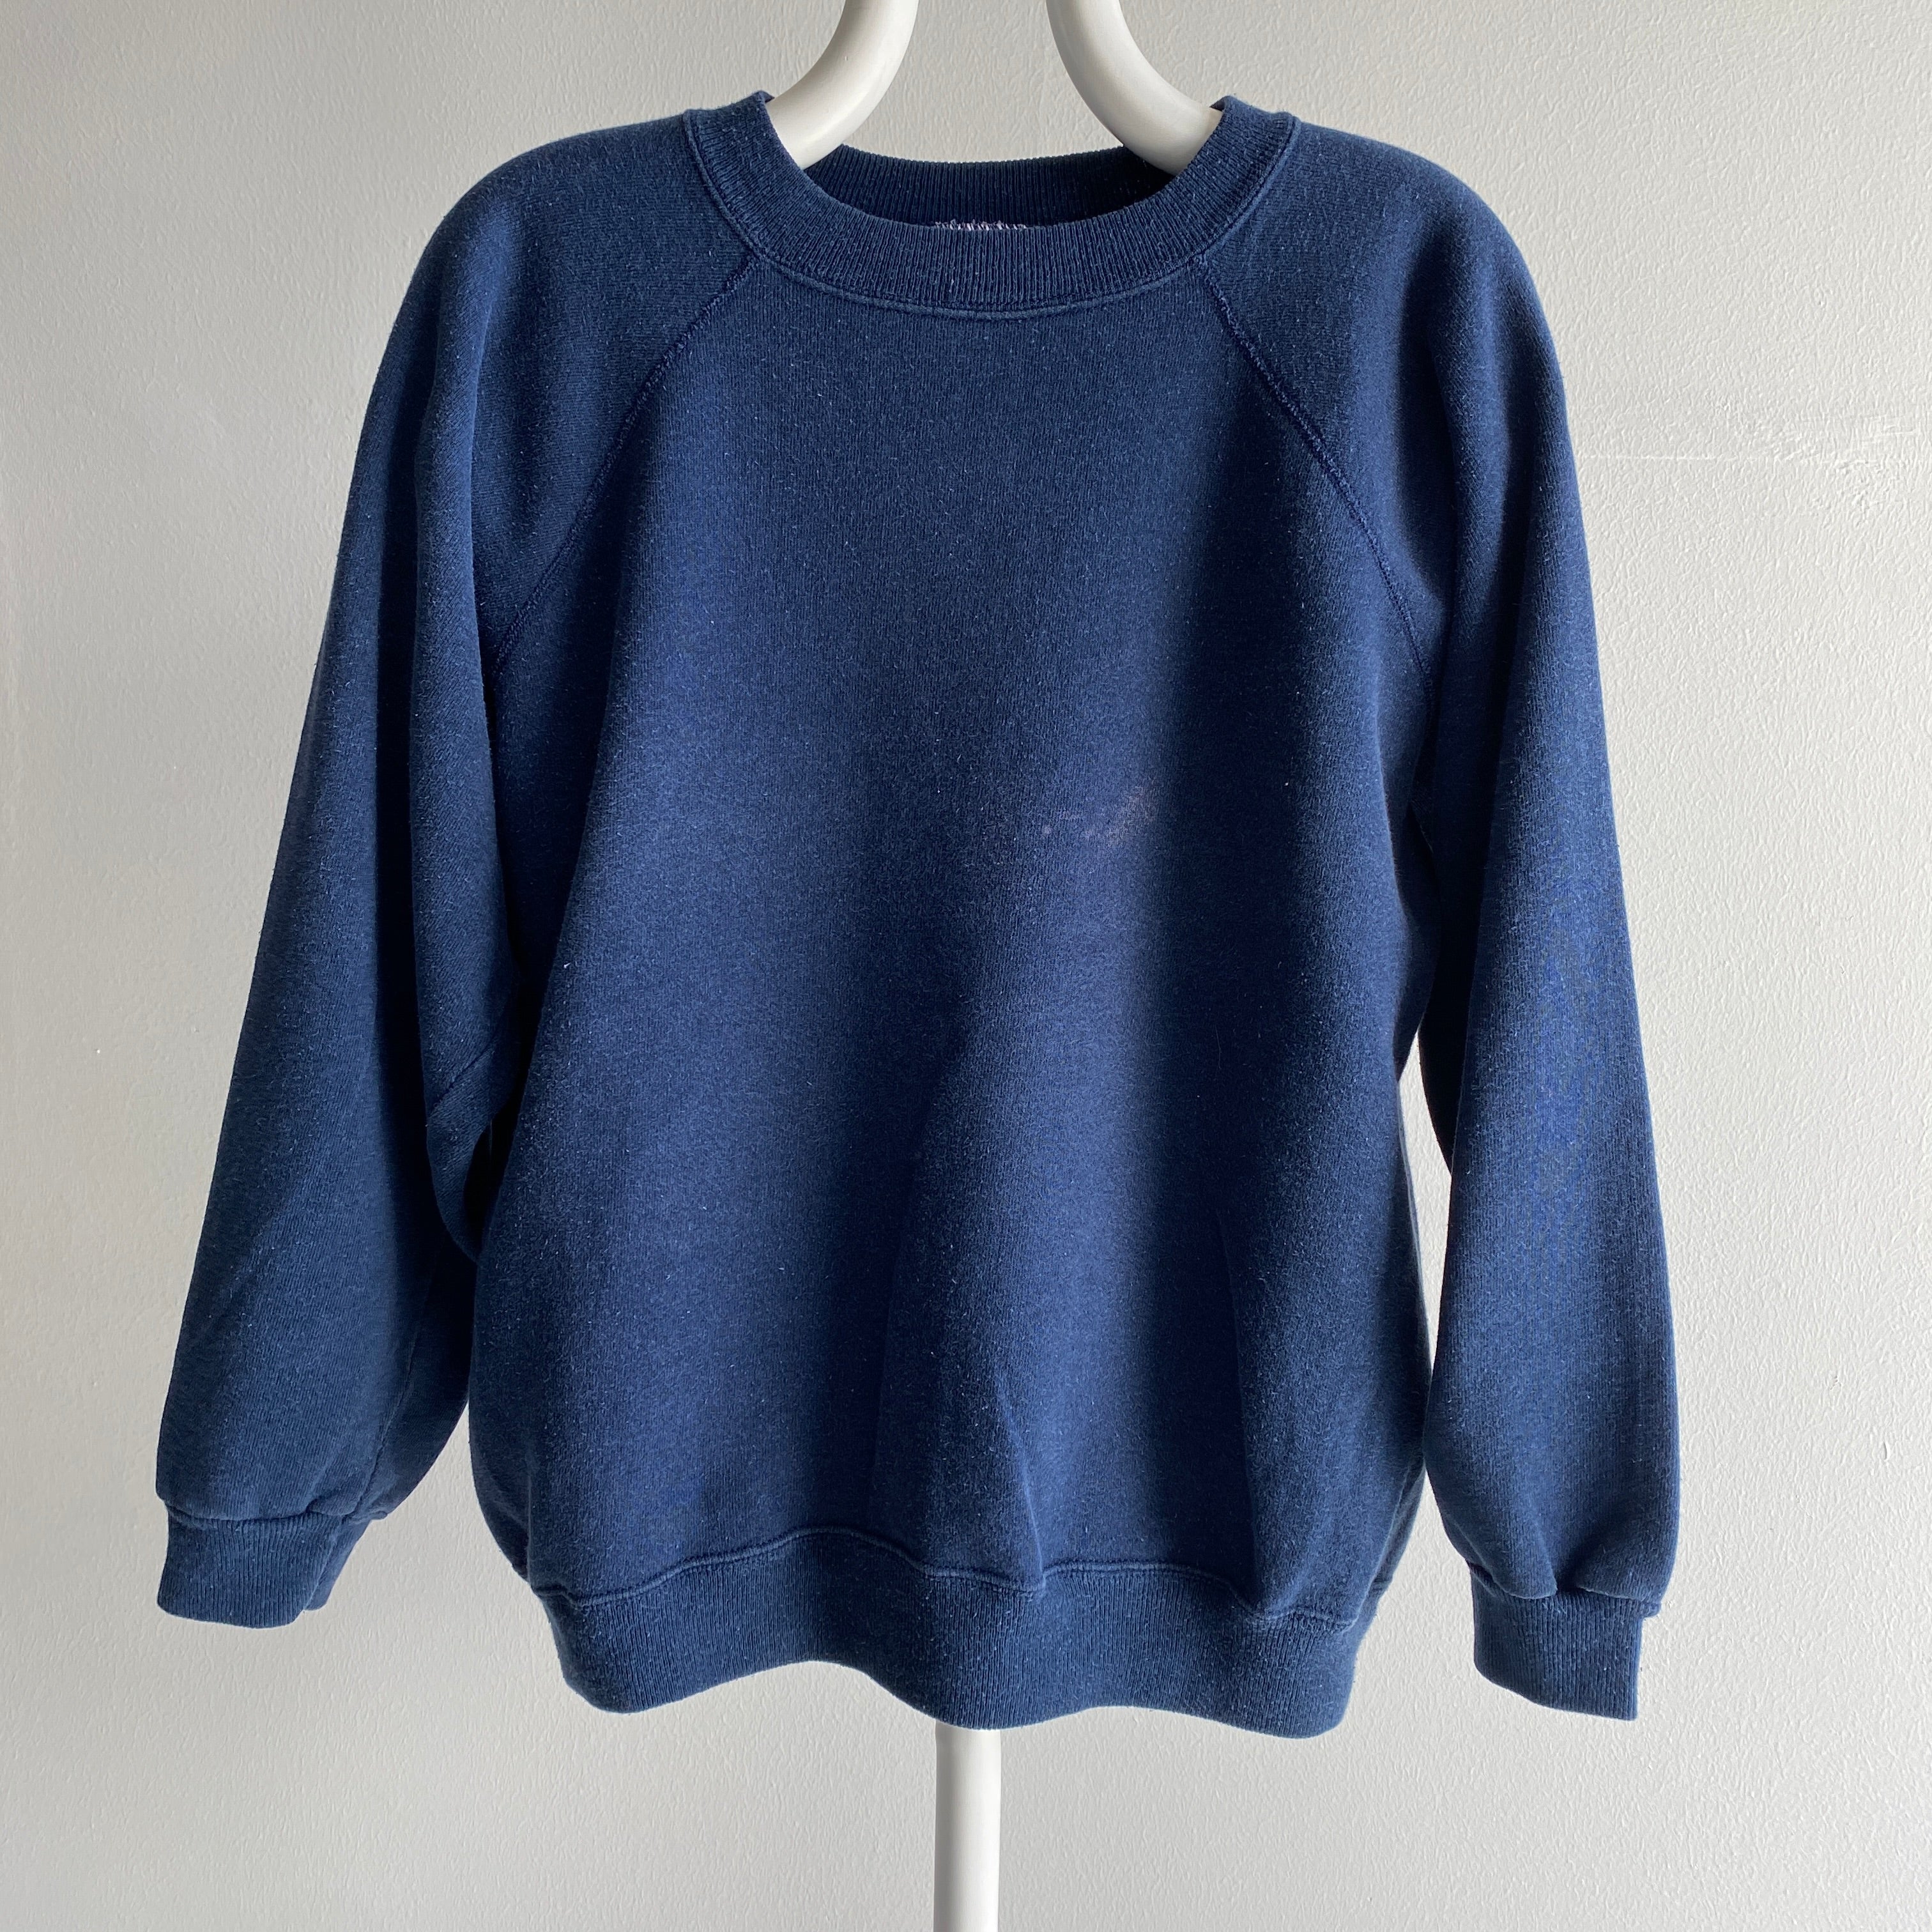 1990s Great Faded Blank Navy Raglan by Hanes with Bleach Splotches